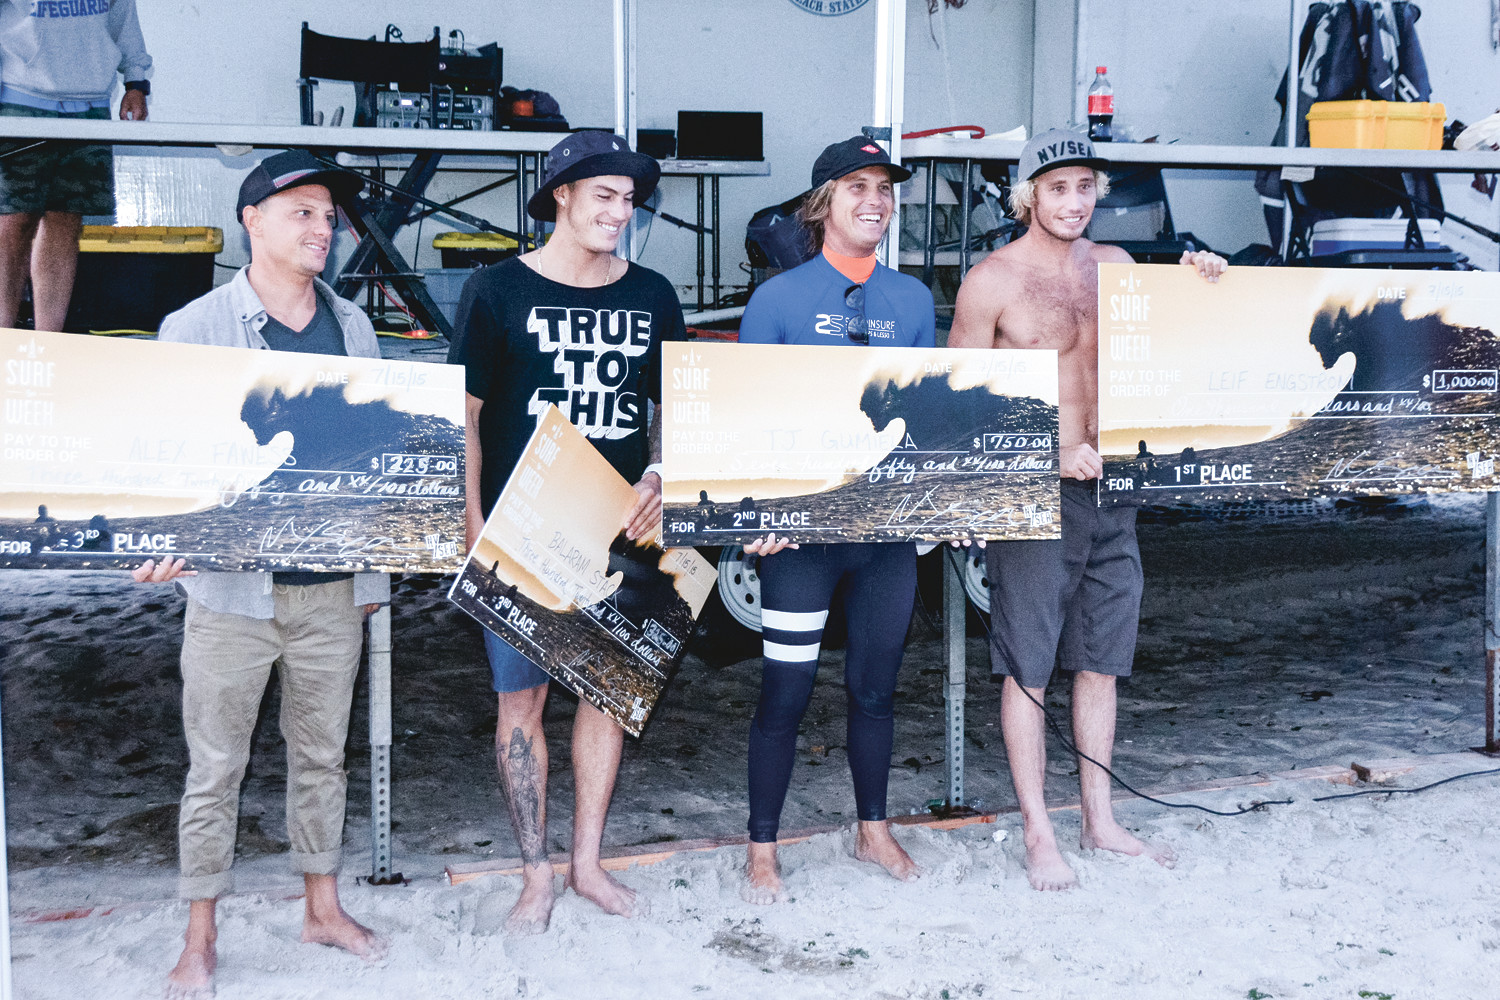 Finalists Alexander Fawess, far left, Balaram Stack, TJ Gumiela and Leif Engstrom dominated the competition on July 15 to kick off NY Surf Week.